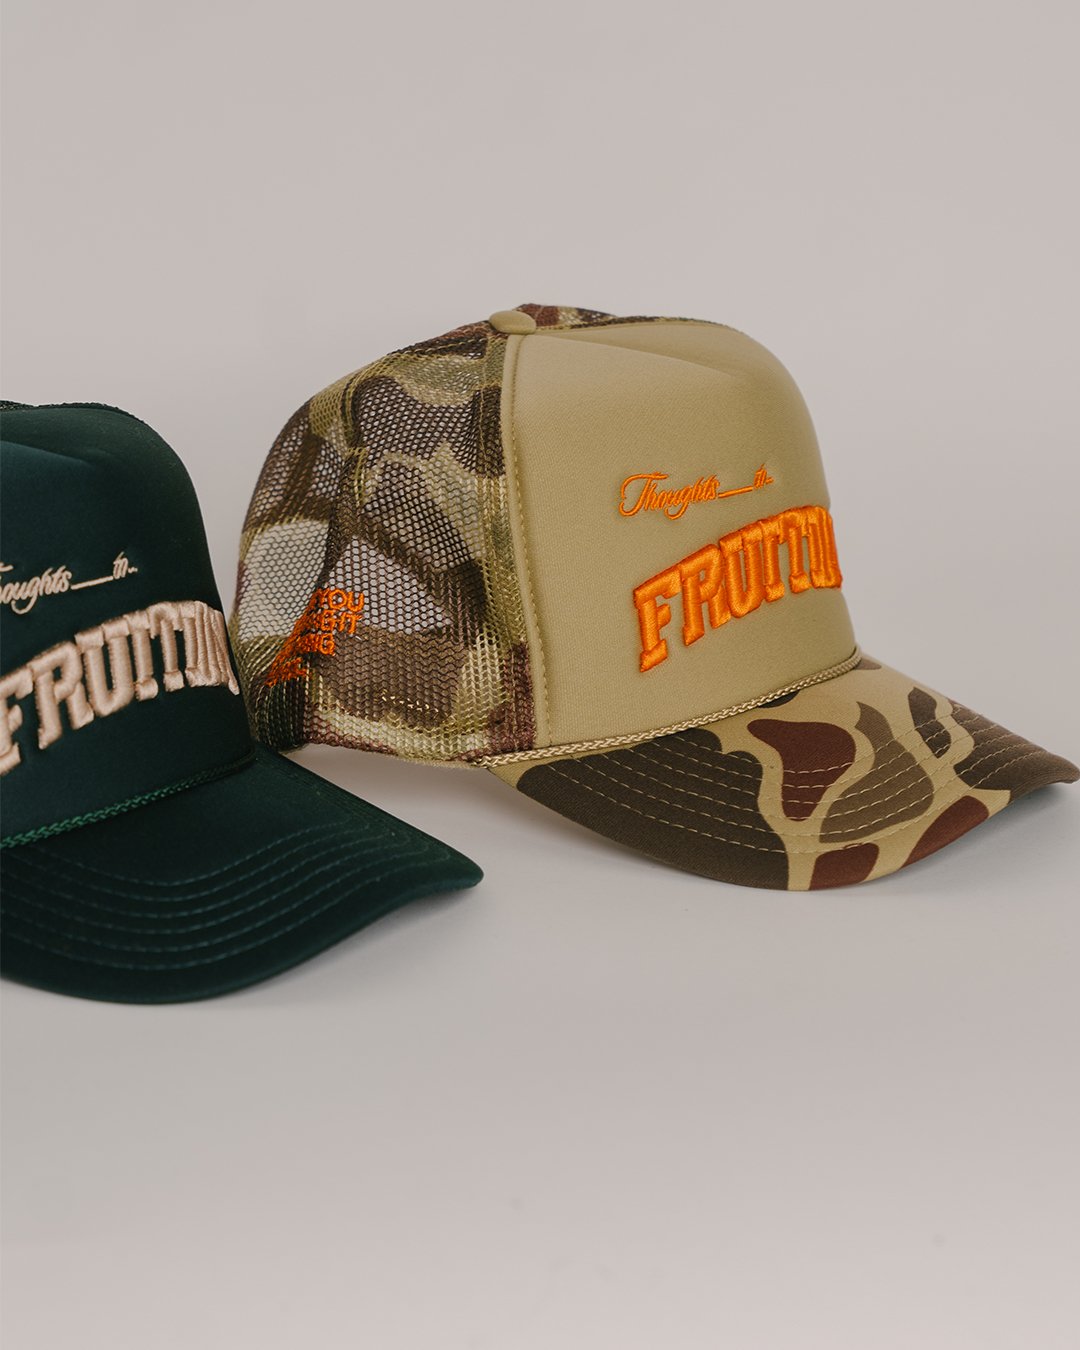 Fruition Light Camo 5 Panel Trucker Hat - trainofthoughtcollective